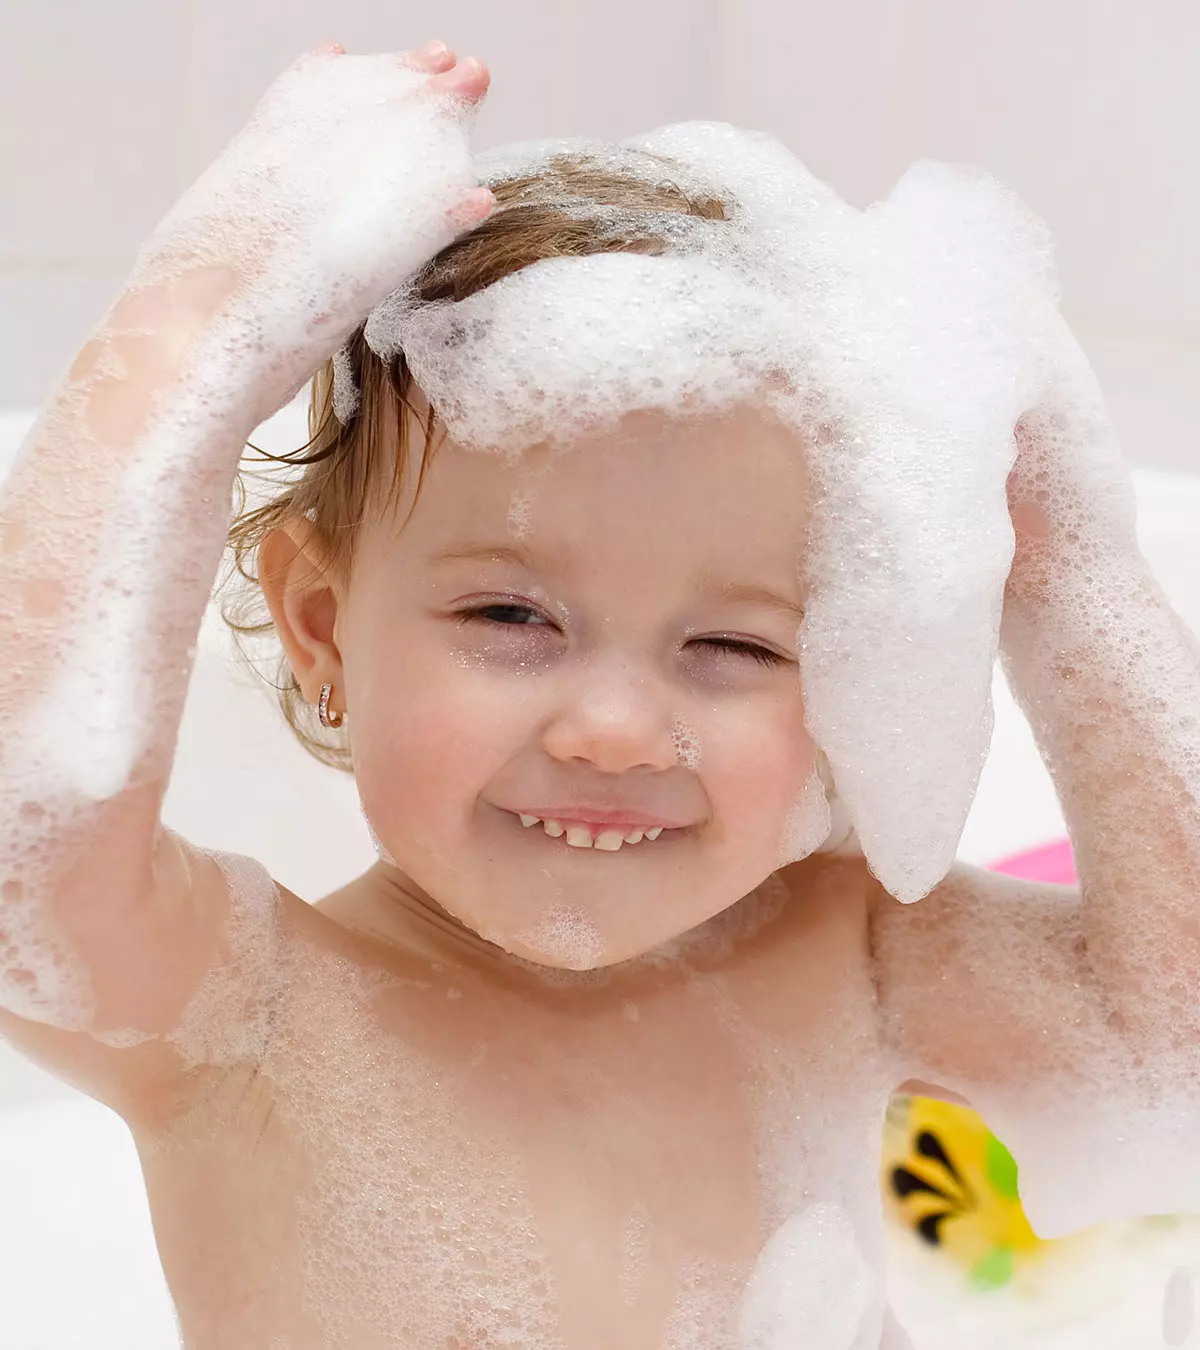 13-Simple-Tips-To-Wash-Your-Toddler's-Hair1